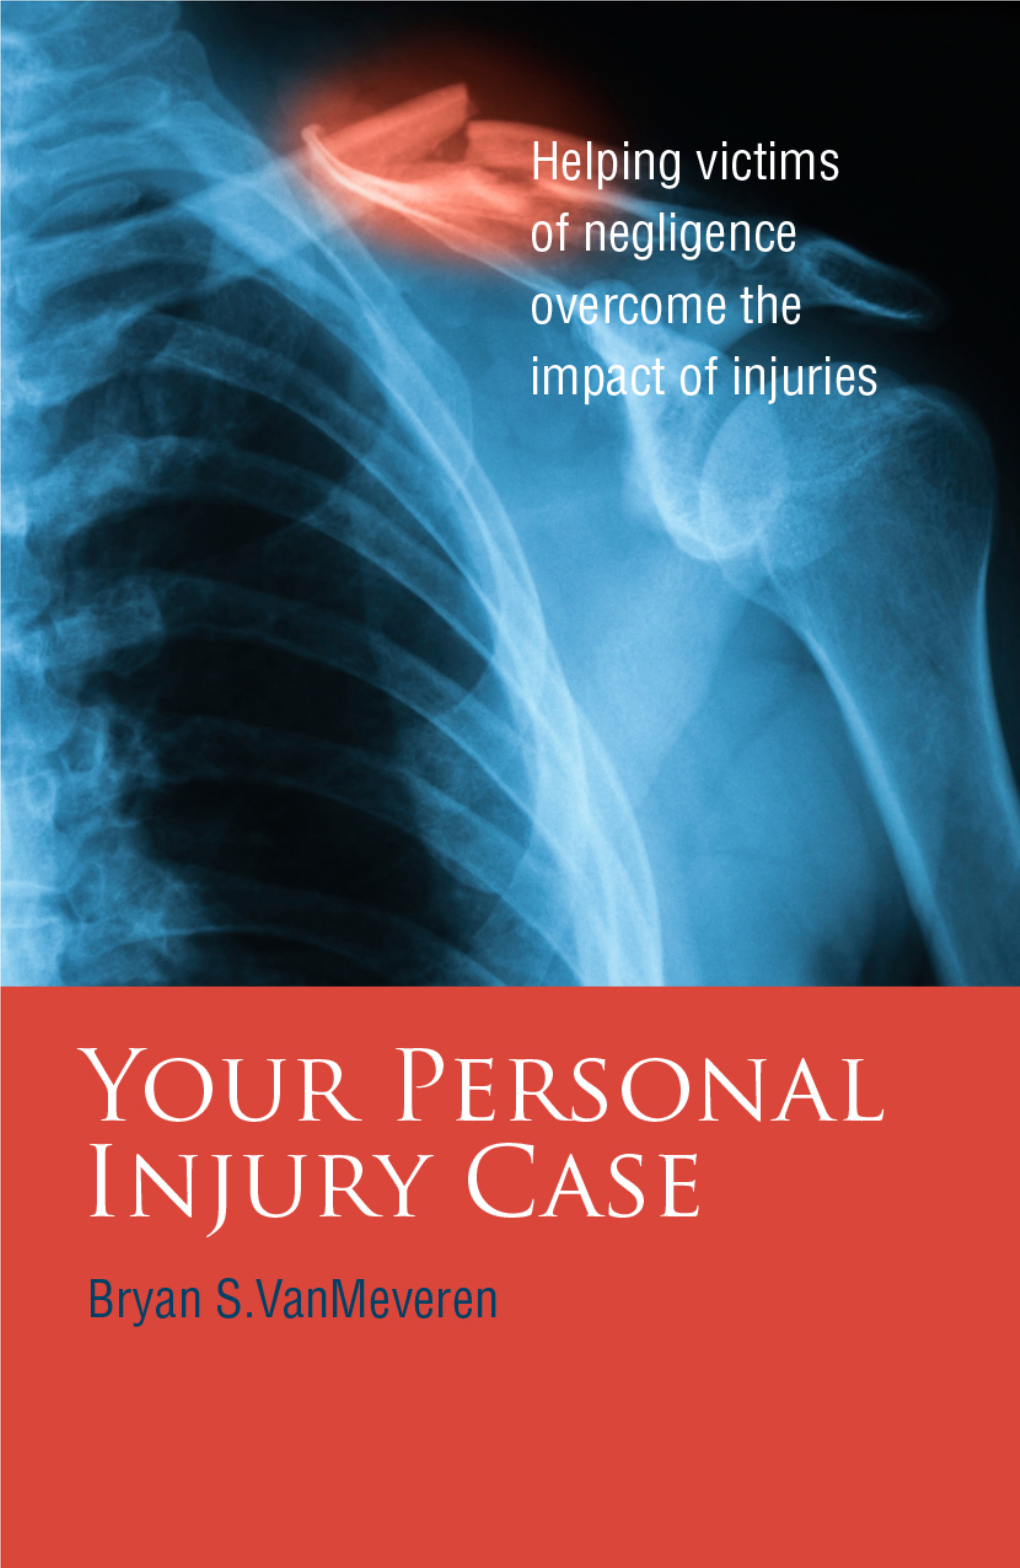 YOUR-PERSONAL-INJURY-CASE.Pdf